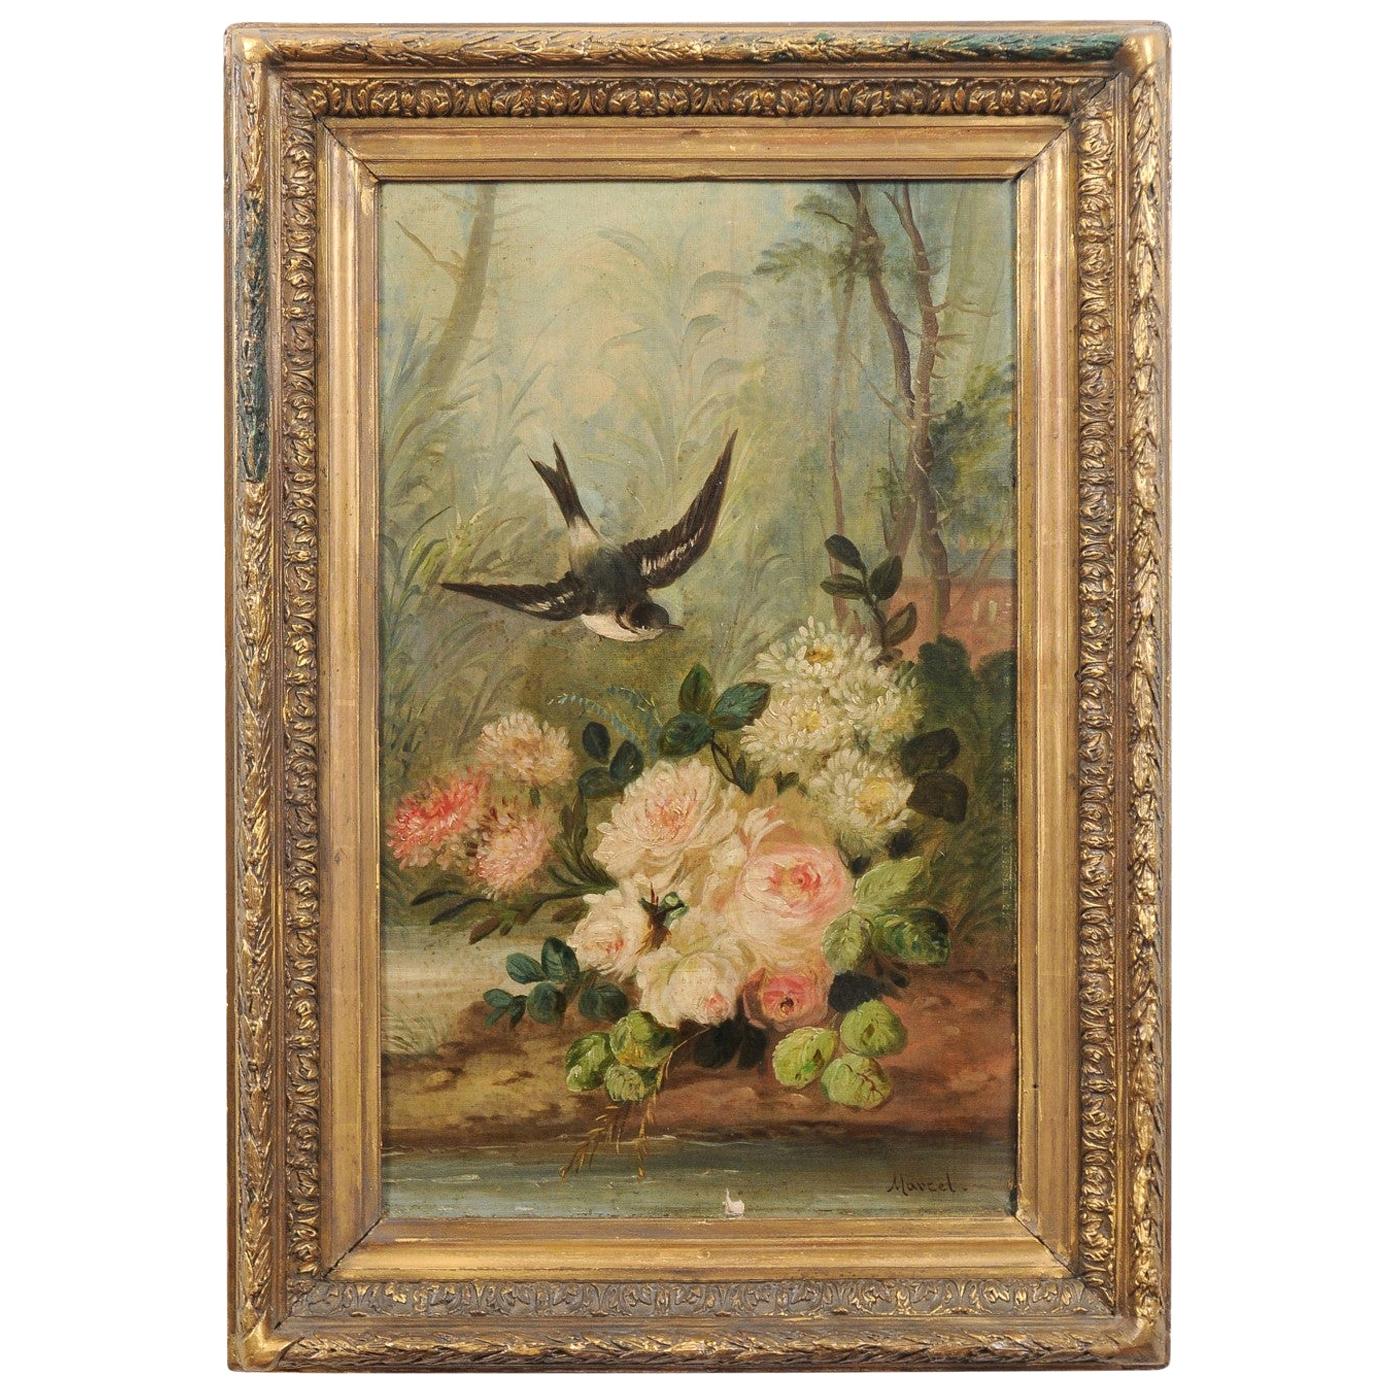 French Napoléon III 1850s Oil on Canvas Framed Painting with Bird and Roses